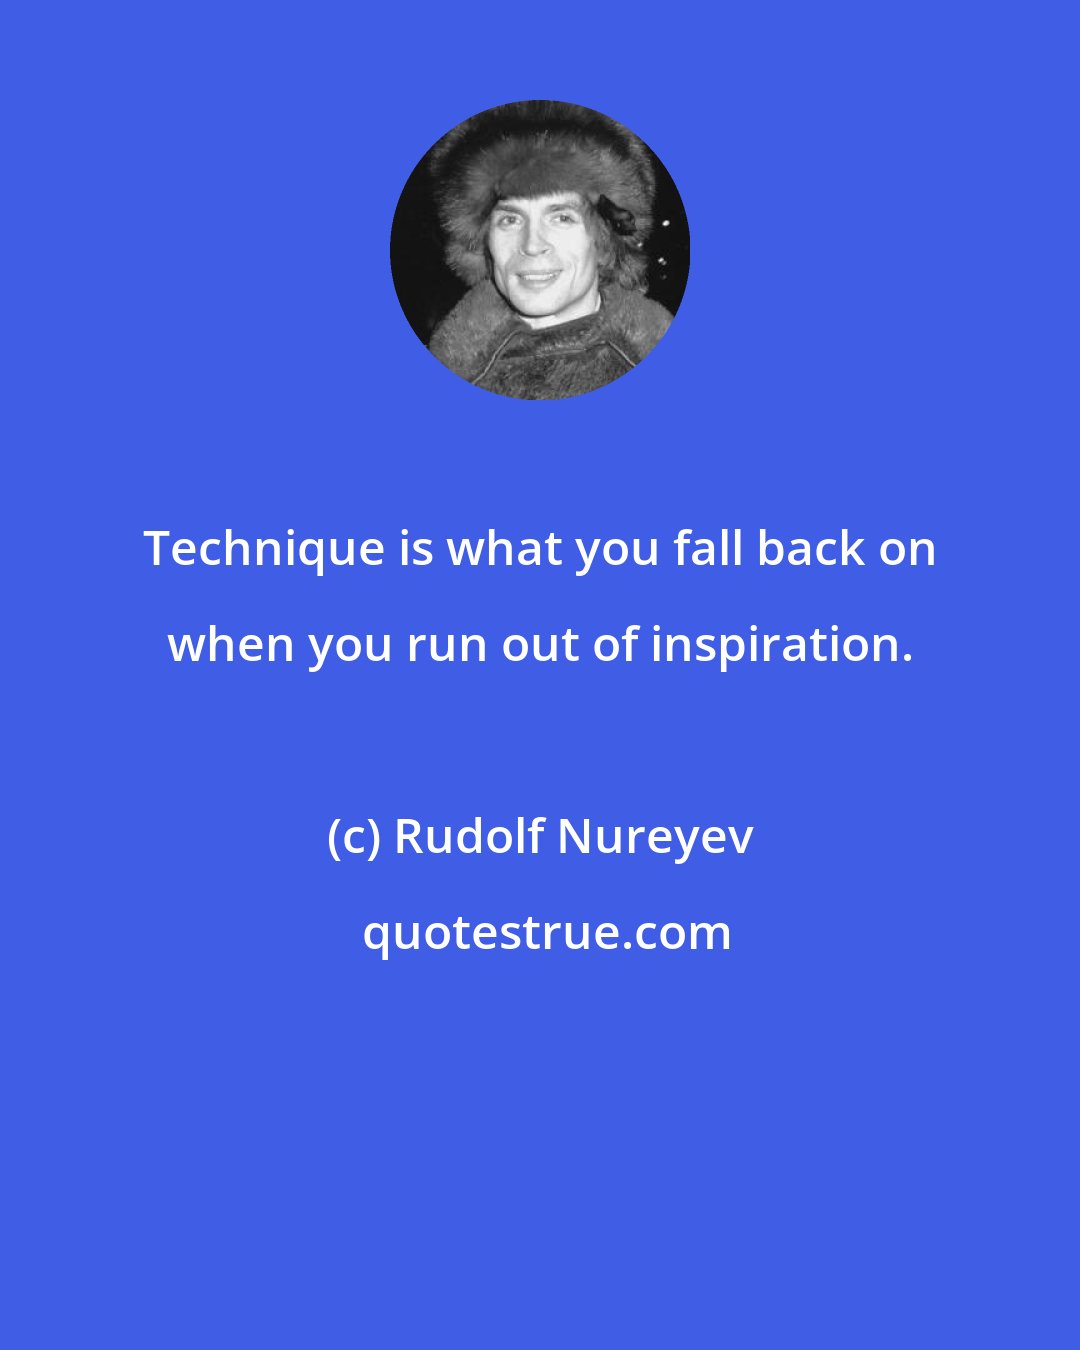 Rudolf Nureyev: Technique is what you fall back on when you run out of inspiration.